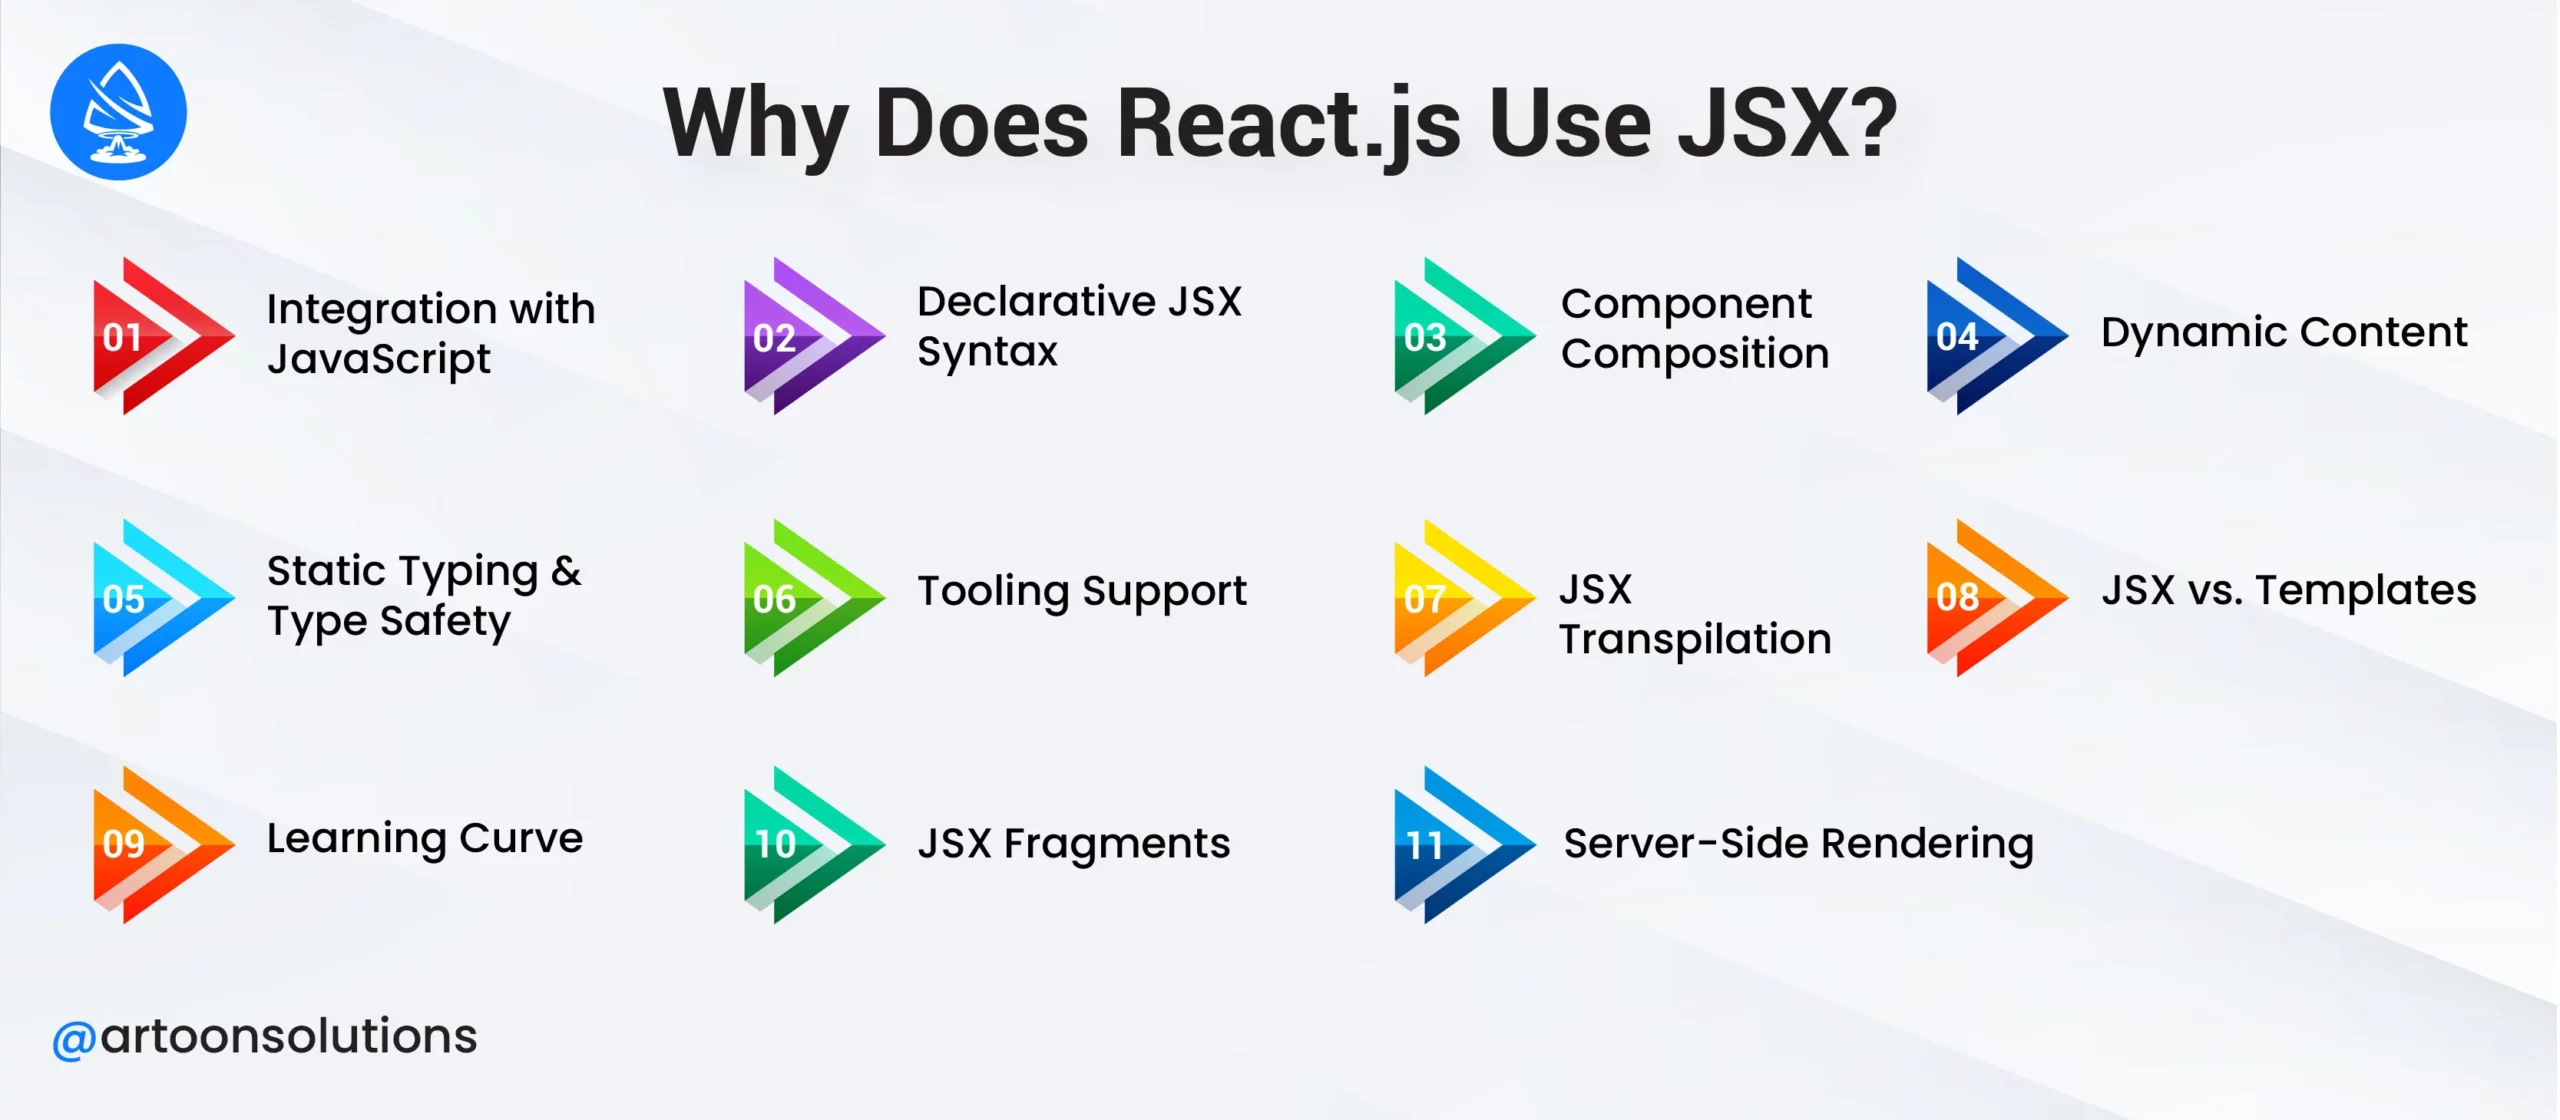 Why Does React.js Use JSX?